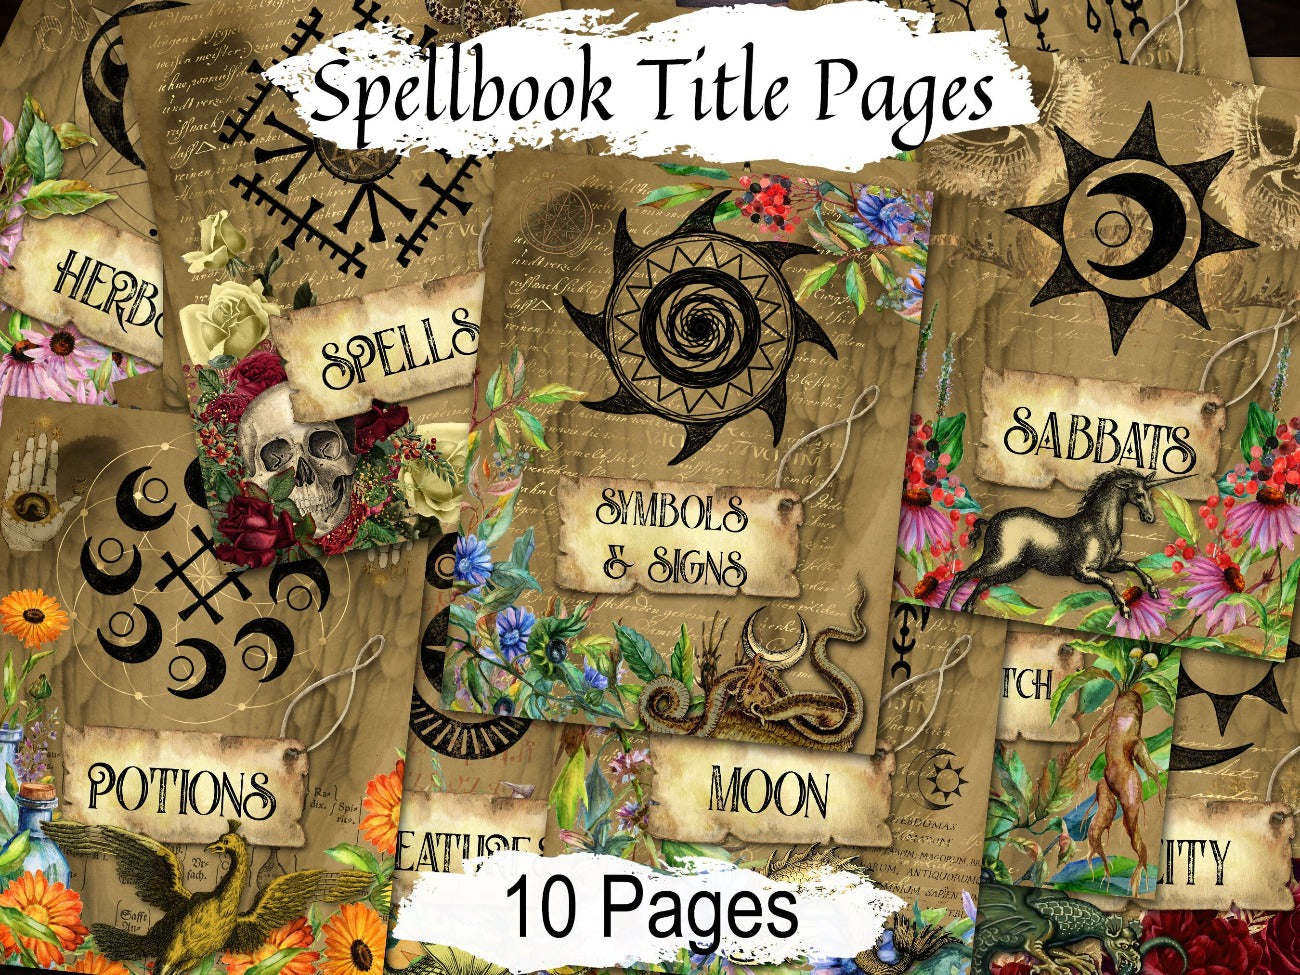 SPELLBOOK TITLE PAGES - Spells Symbols and Signs, Wicca Book of Shadows divider pages. Beautiful Pagan parchment with fantasy creatures, pagan symbols, and flowers- Morgana Magick Spell